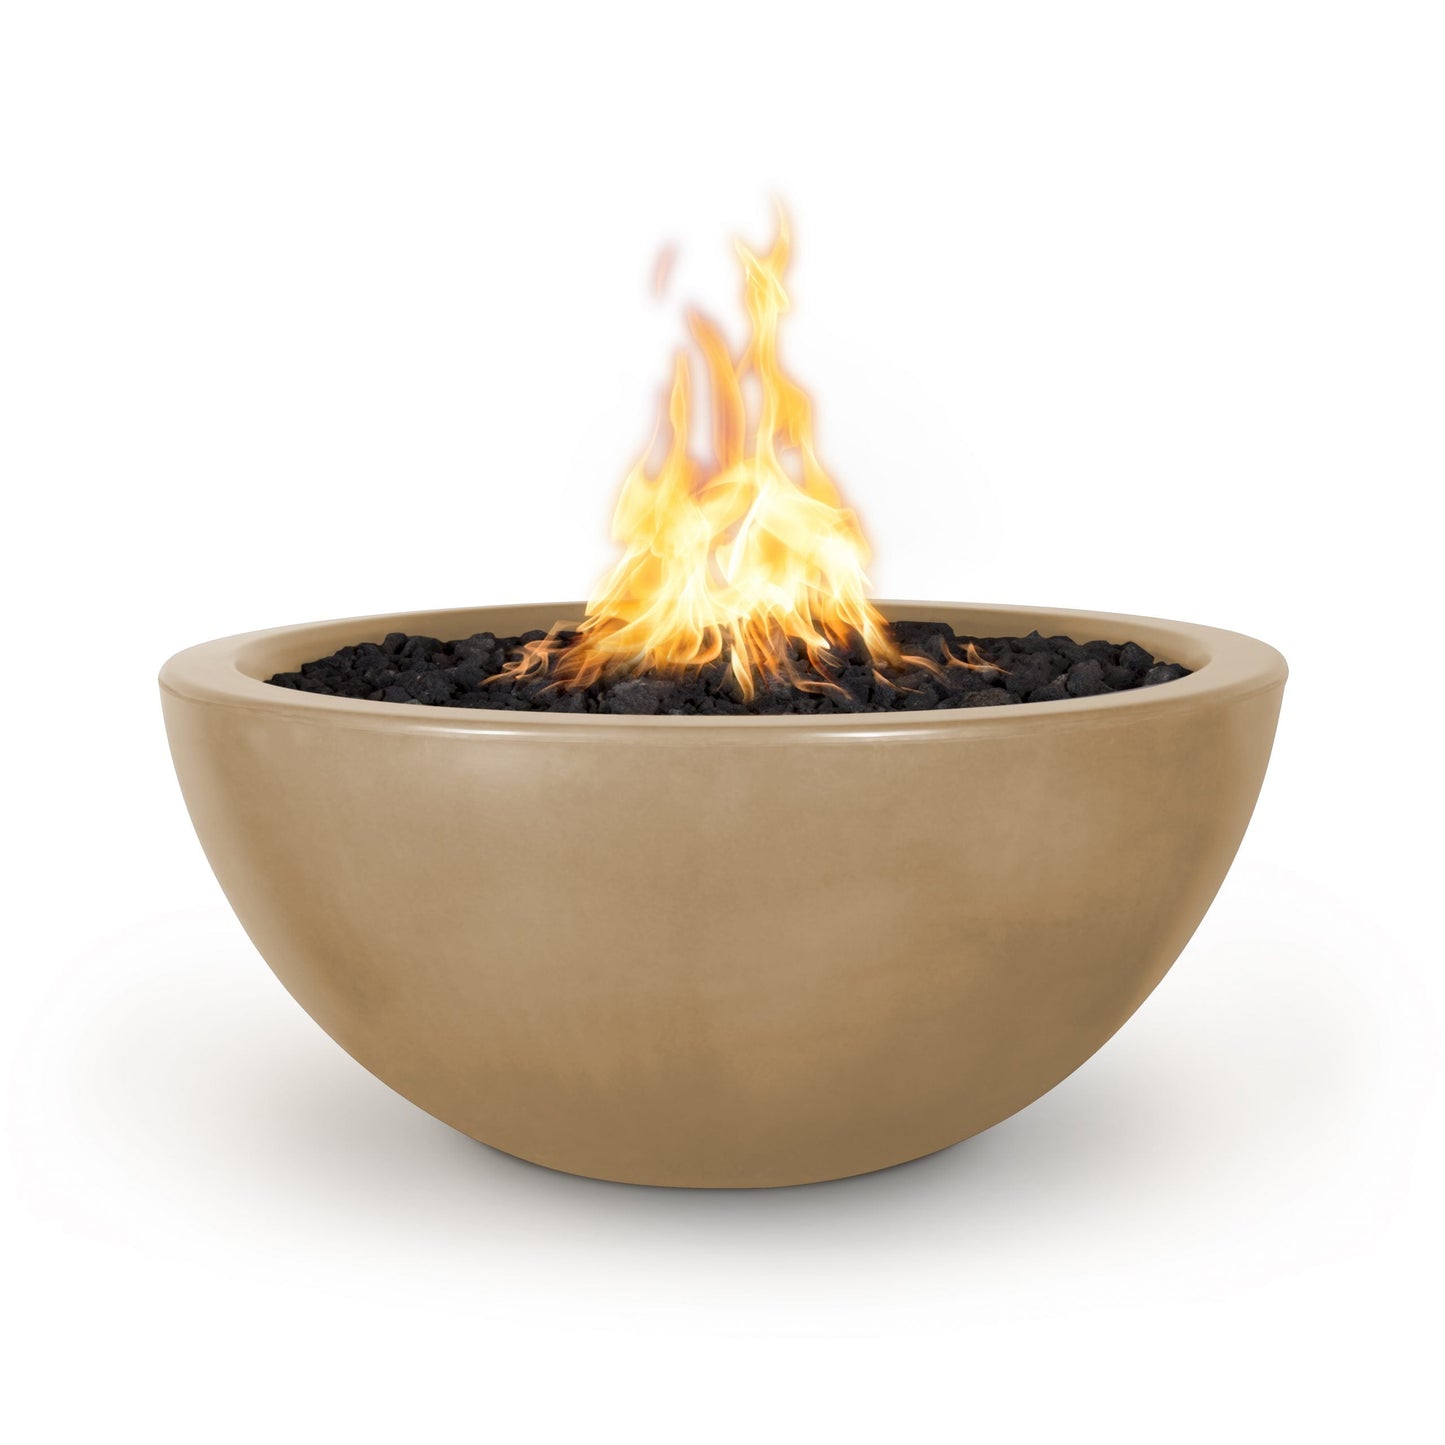 The Outdoor Plus Round Luna 38" Chocolate GFRC Concrete Natural Gas Fire Bowl with Match Lit with Flame Sense Ignition